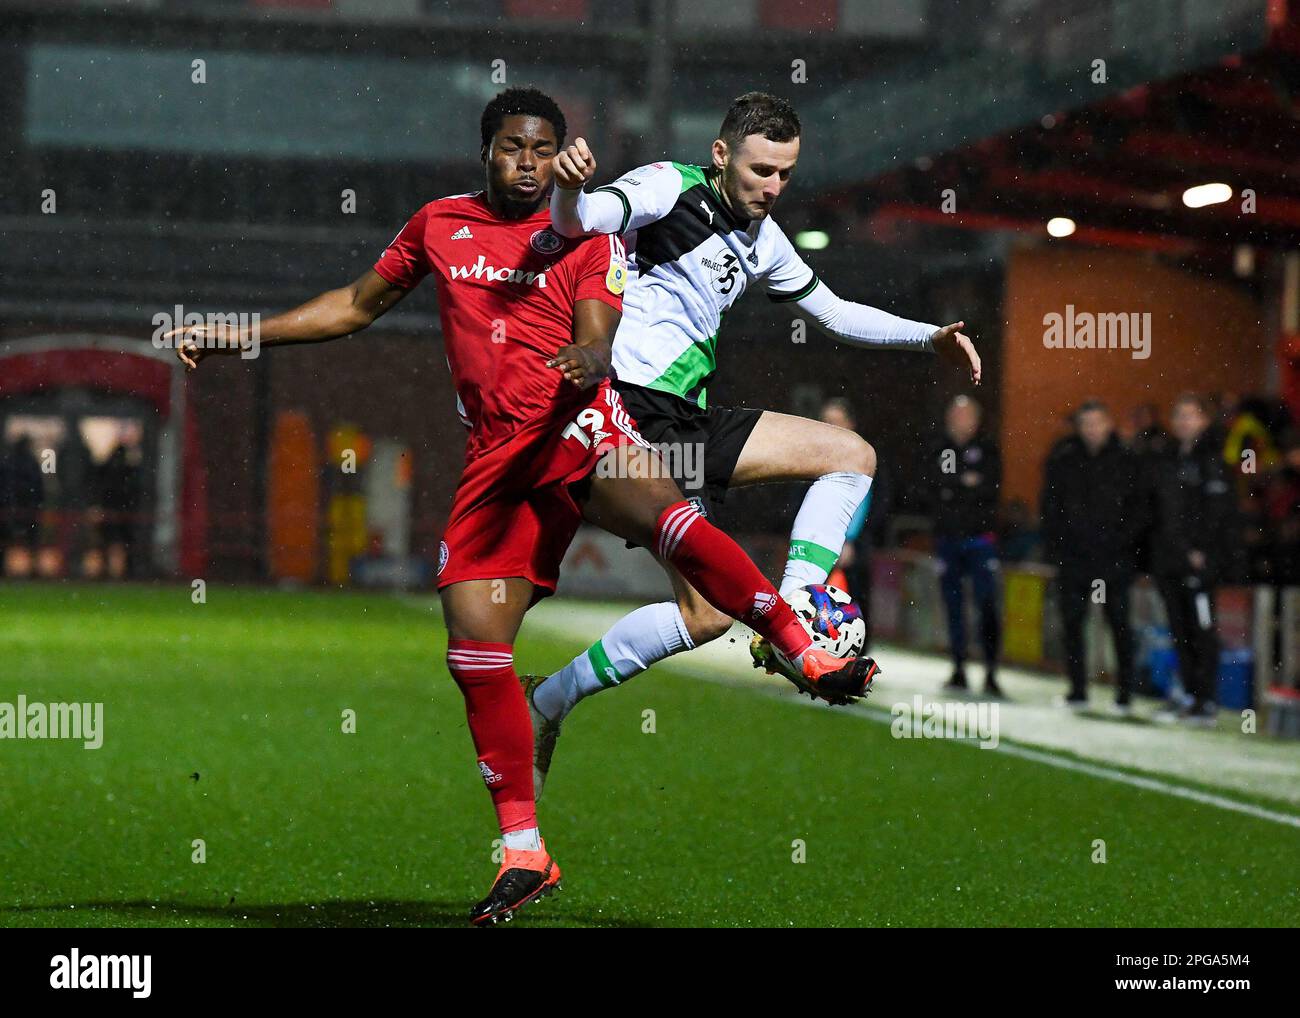 Macaulay Gillesphey #3 of Plymouth Argyle battles for the ball during the Sky Bet League 1 match Accrington Stanley vs Plymouth Argyle at Wham Stadium, Accrington, United Kingdom, 21st March 2023  (Photo by Stan Kasala/News Images) Stock Photo